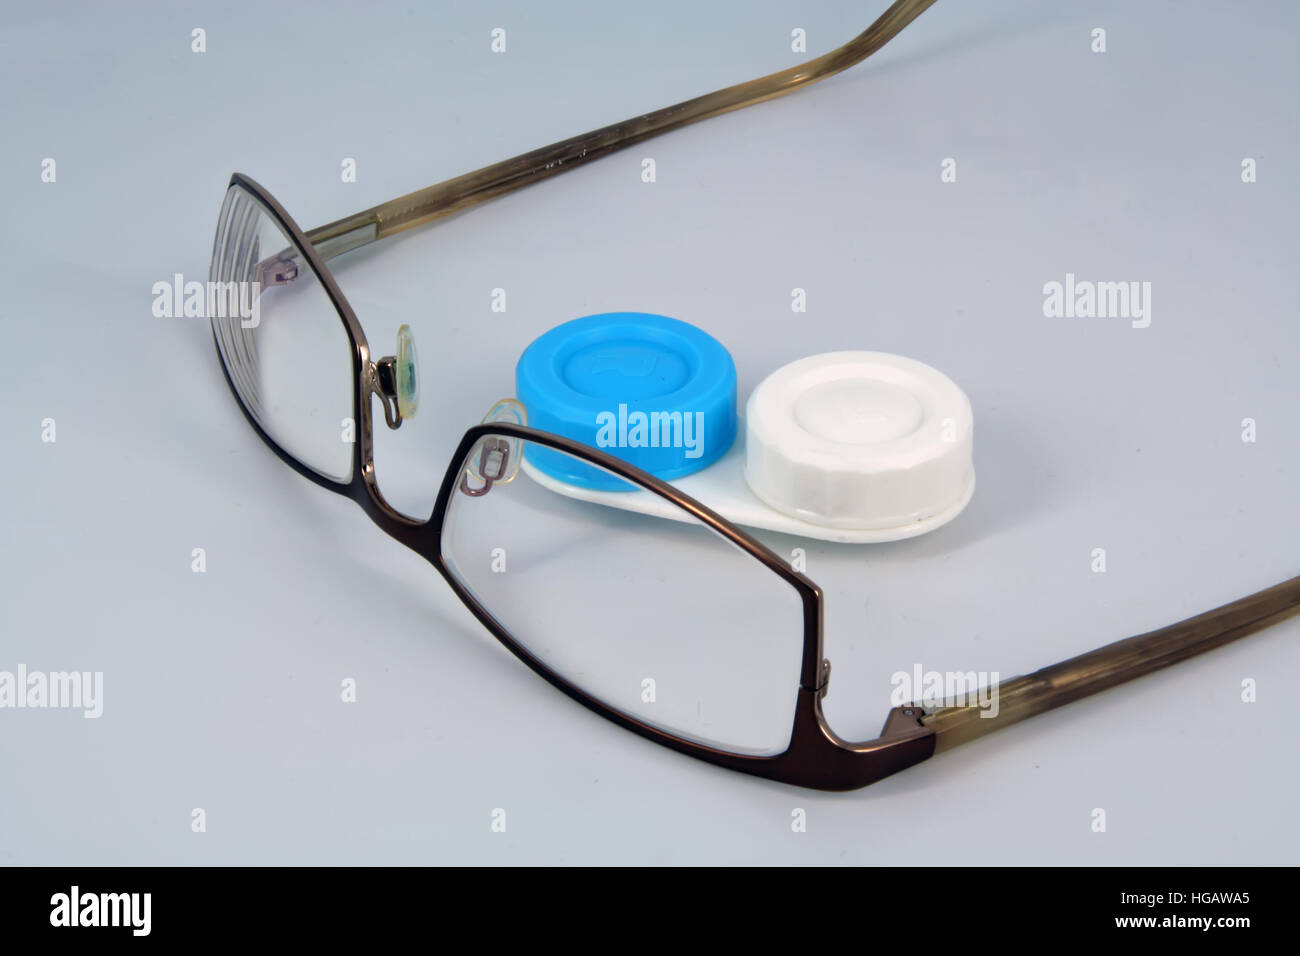 Spectacles and contact lenses. Eye glasses, and lenses box. Stock Photo